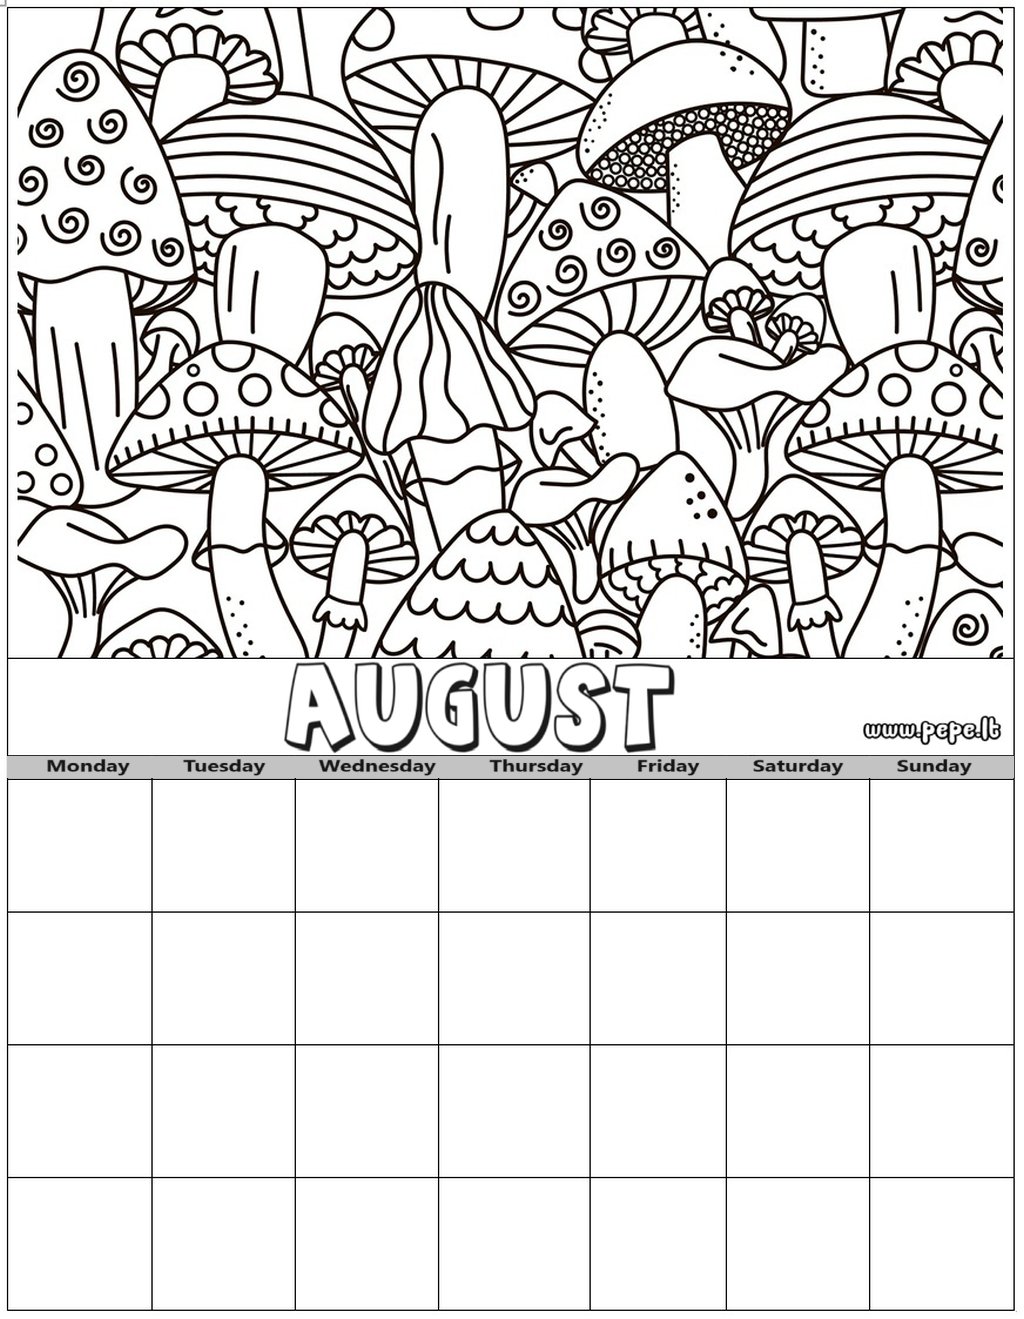 August calendar for coloring